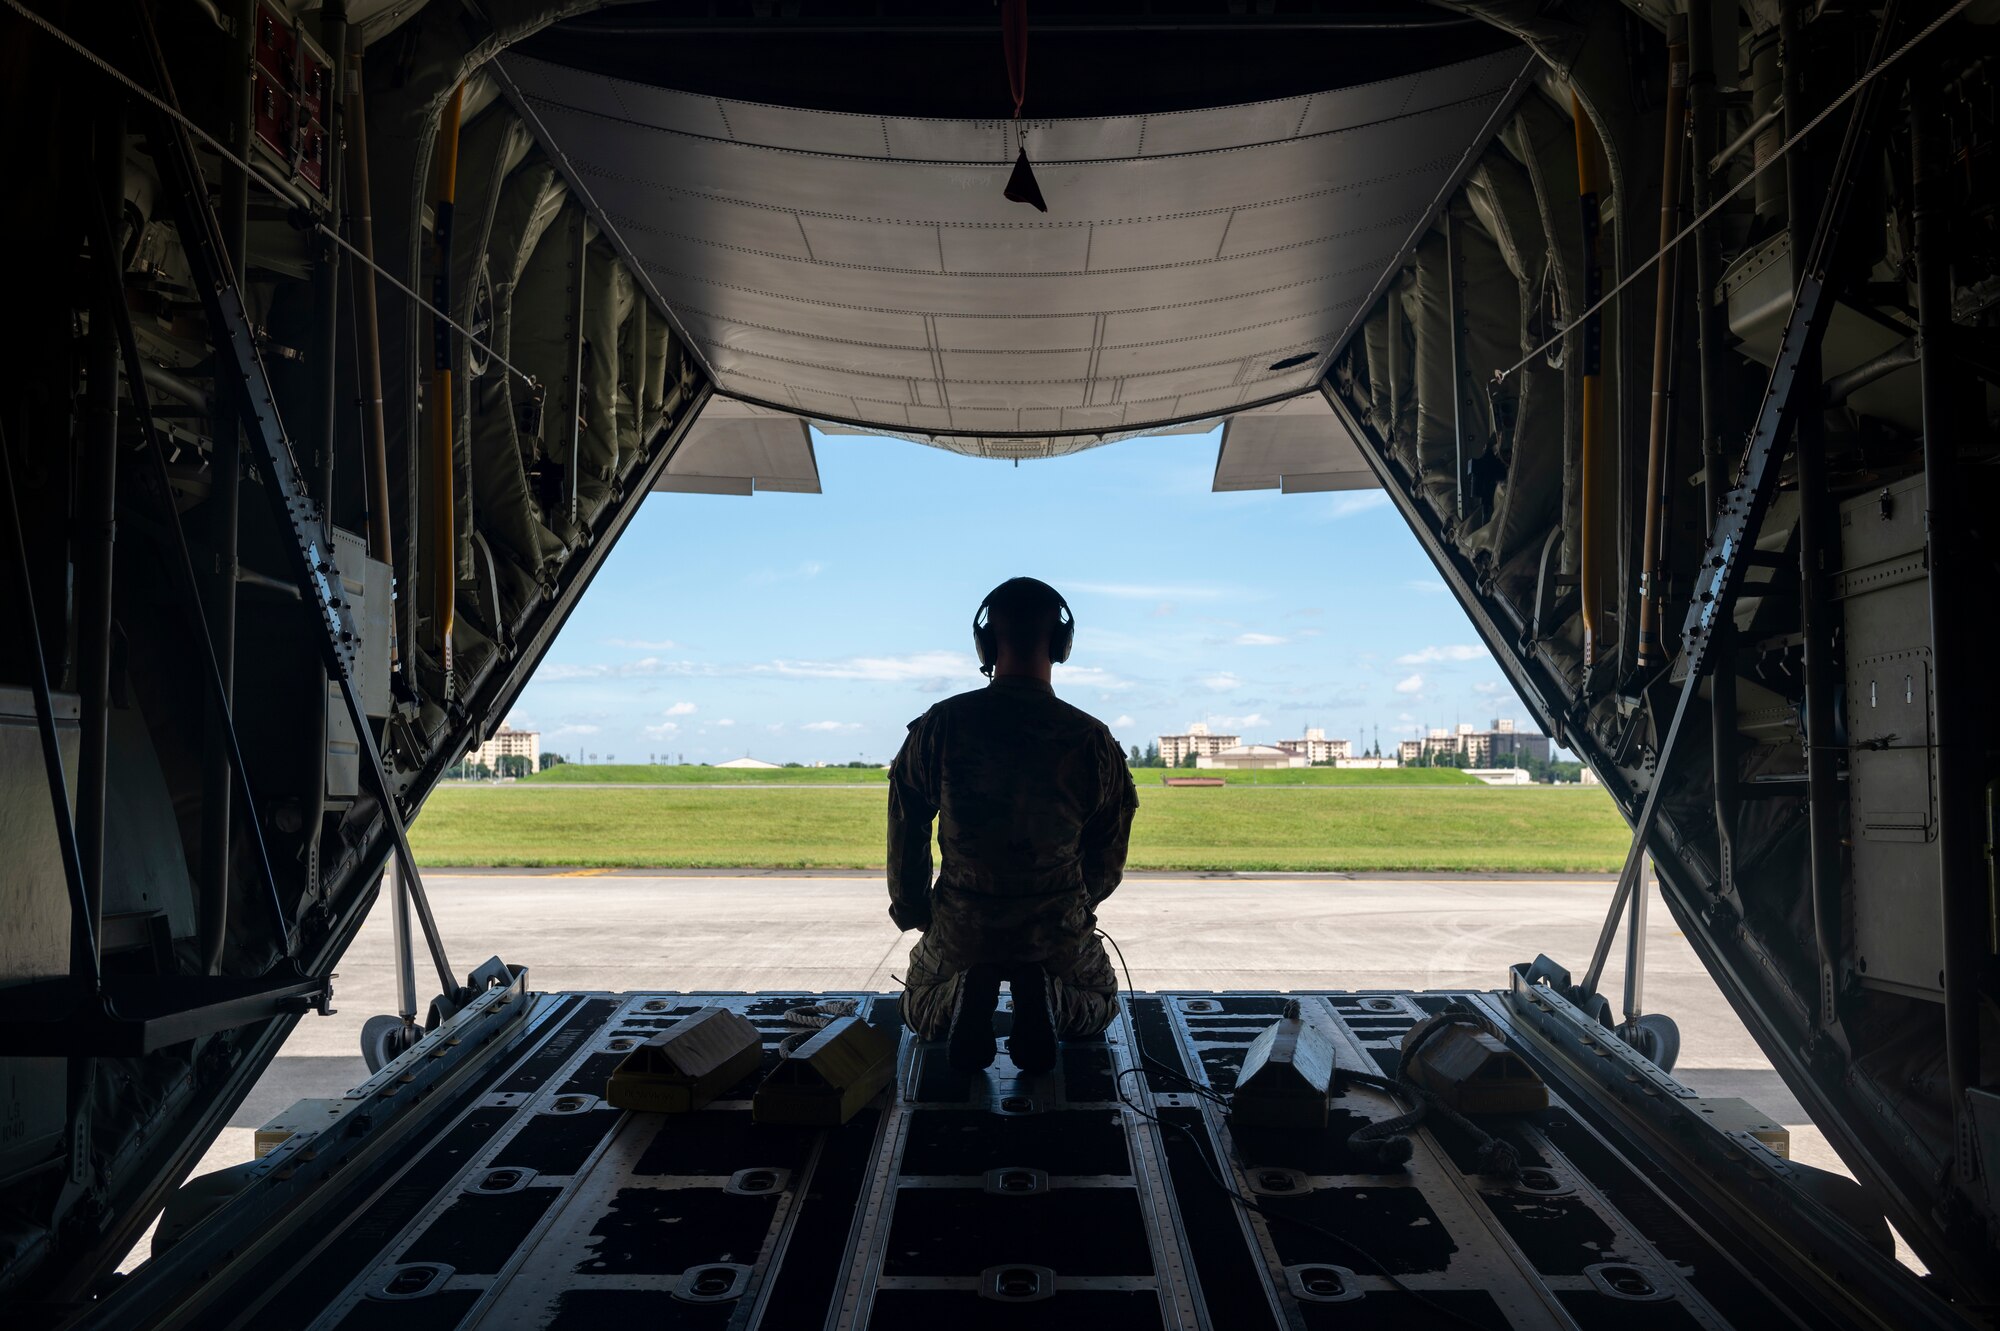 I loadmaster sits in silhouette as he looks out the back of a plan's rear hatch